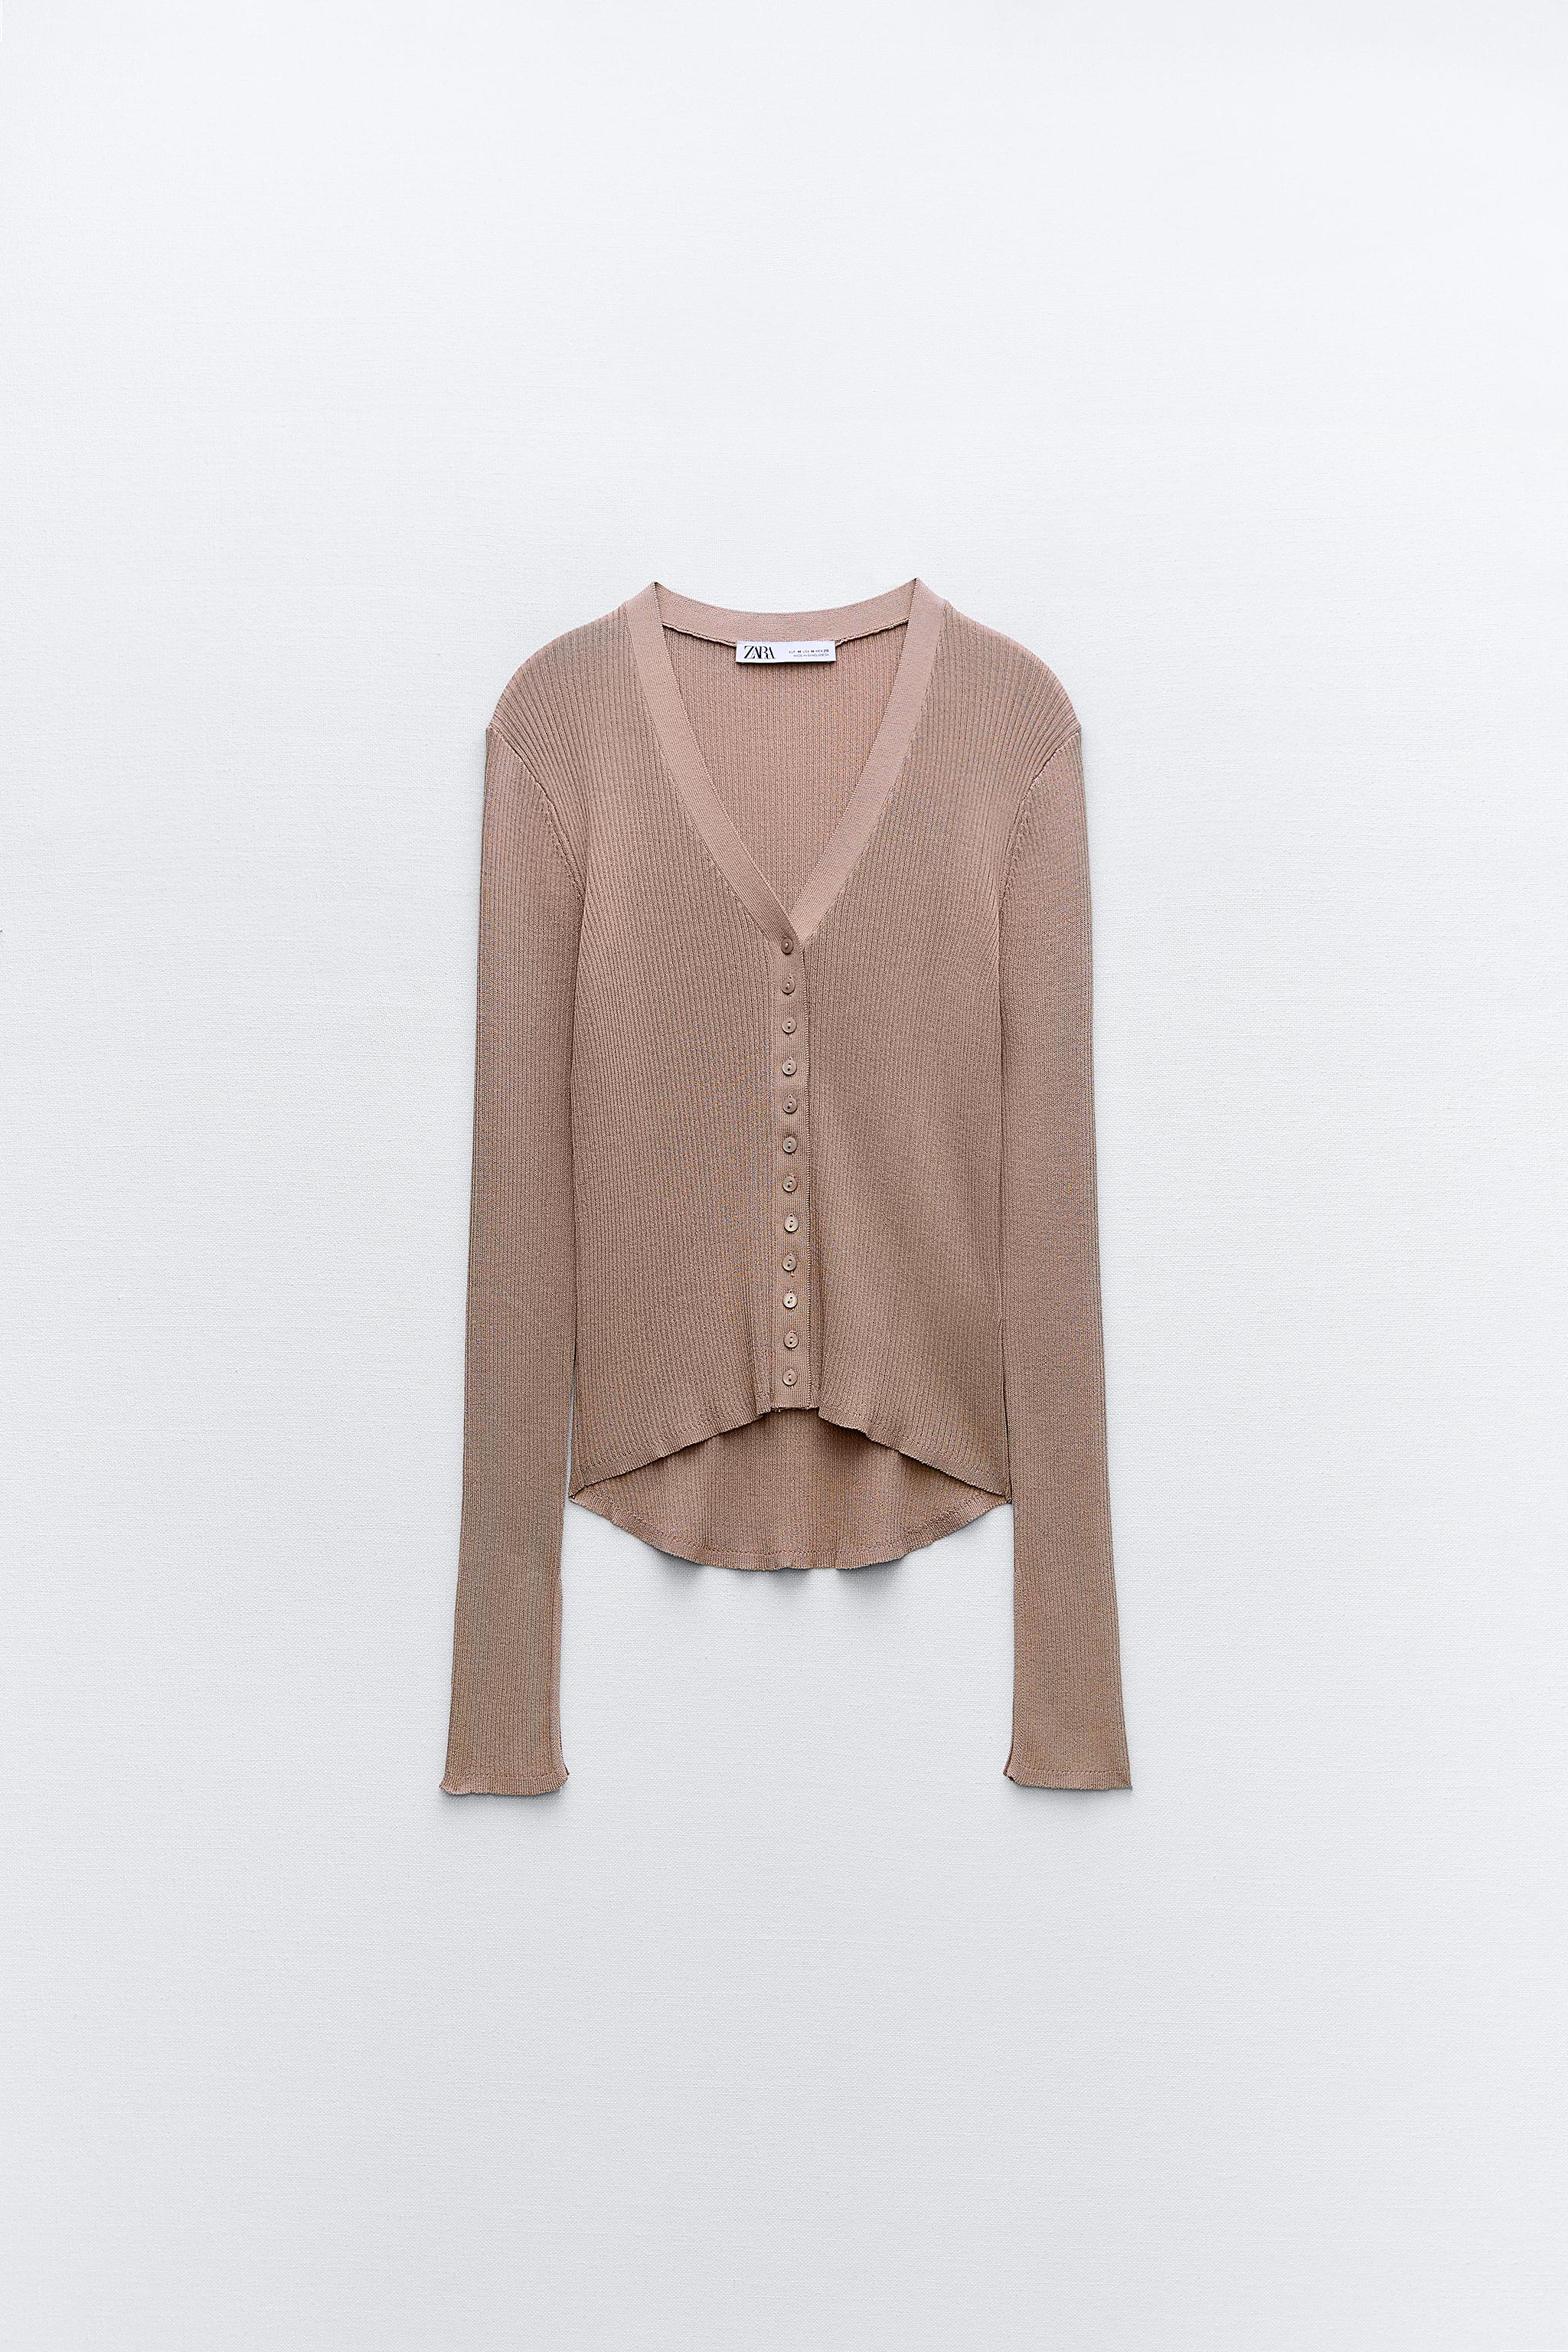 FINE RIBBED KNIT CARDIGAN - Taupe gray